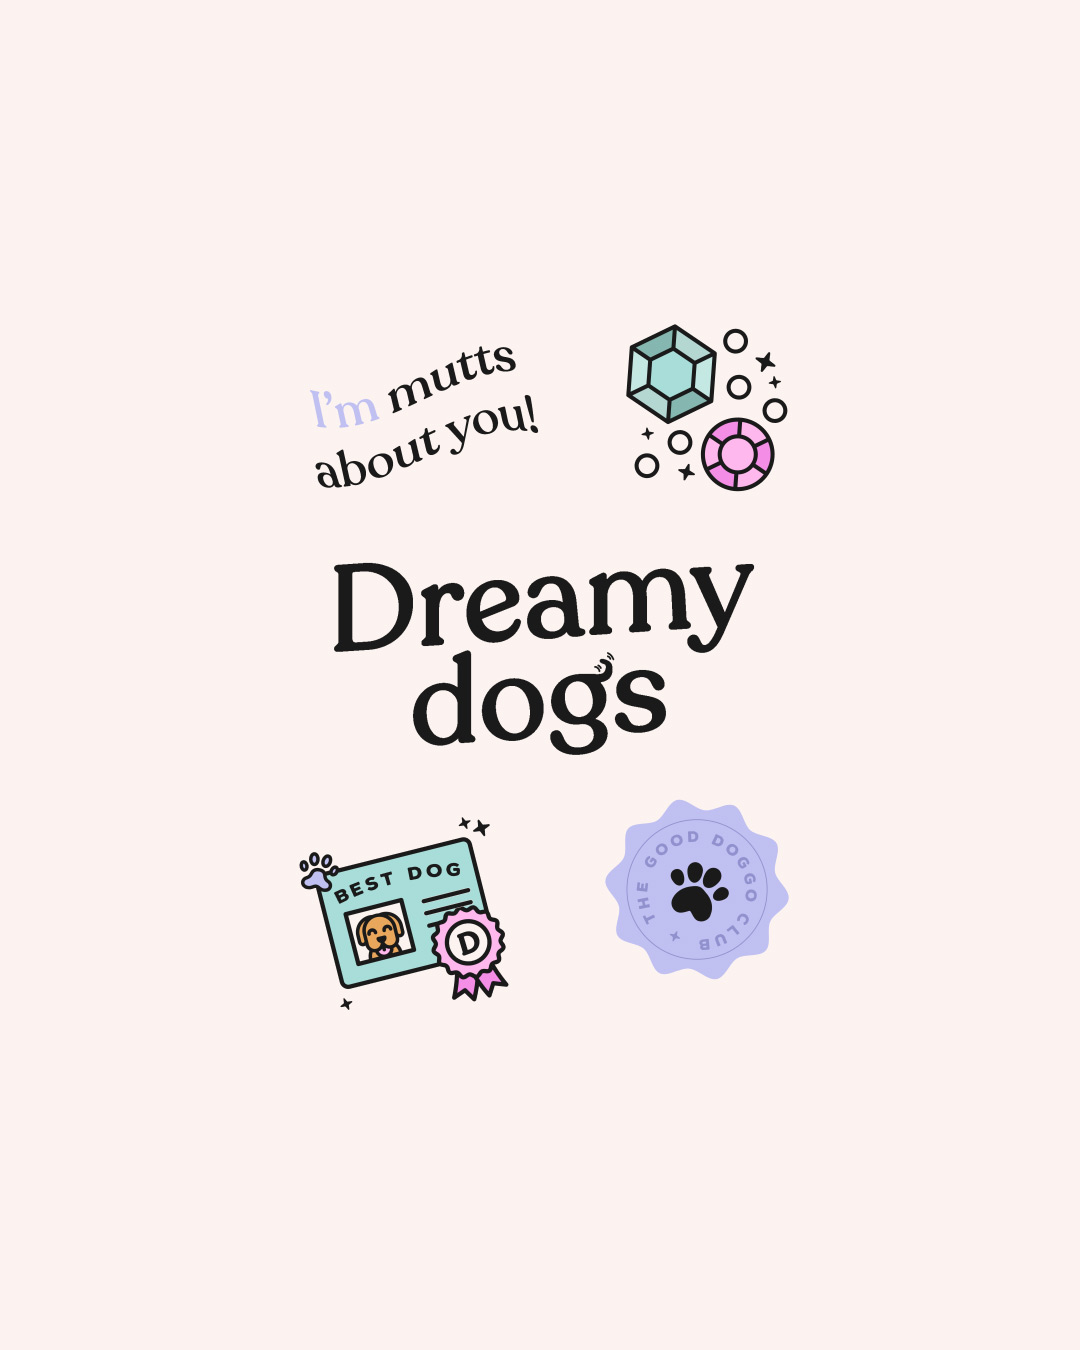 Animated stickers for Dreamy Dogs, for pups of all shapes and sizes - designed by Wiltshire-based graphic designer